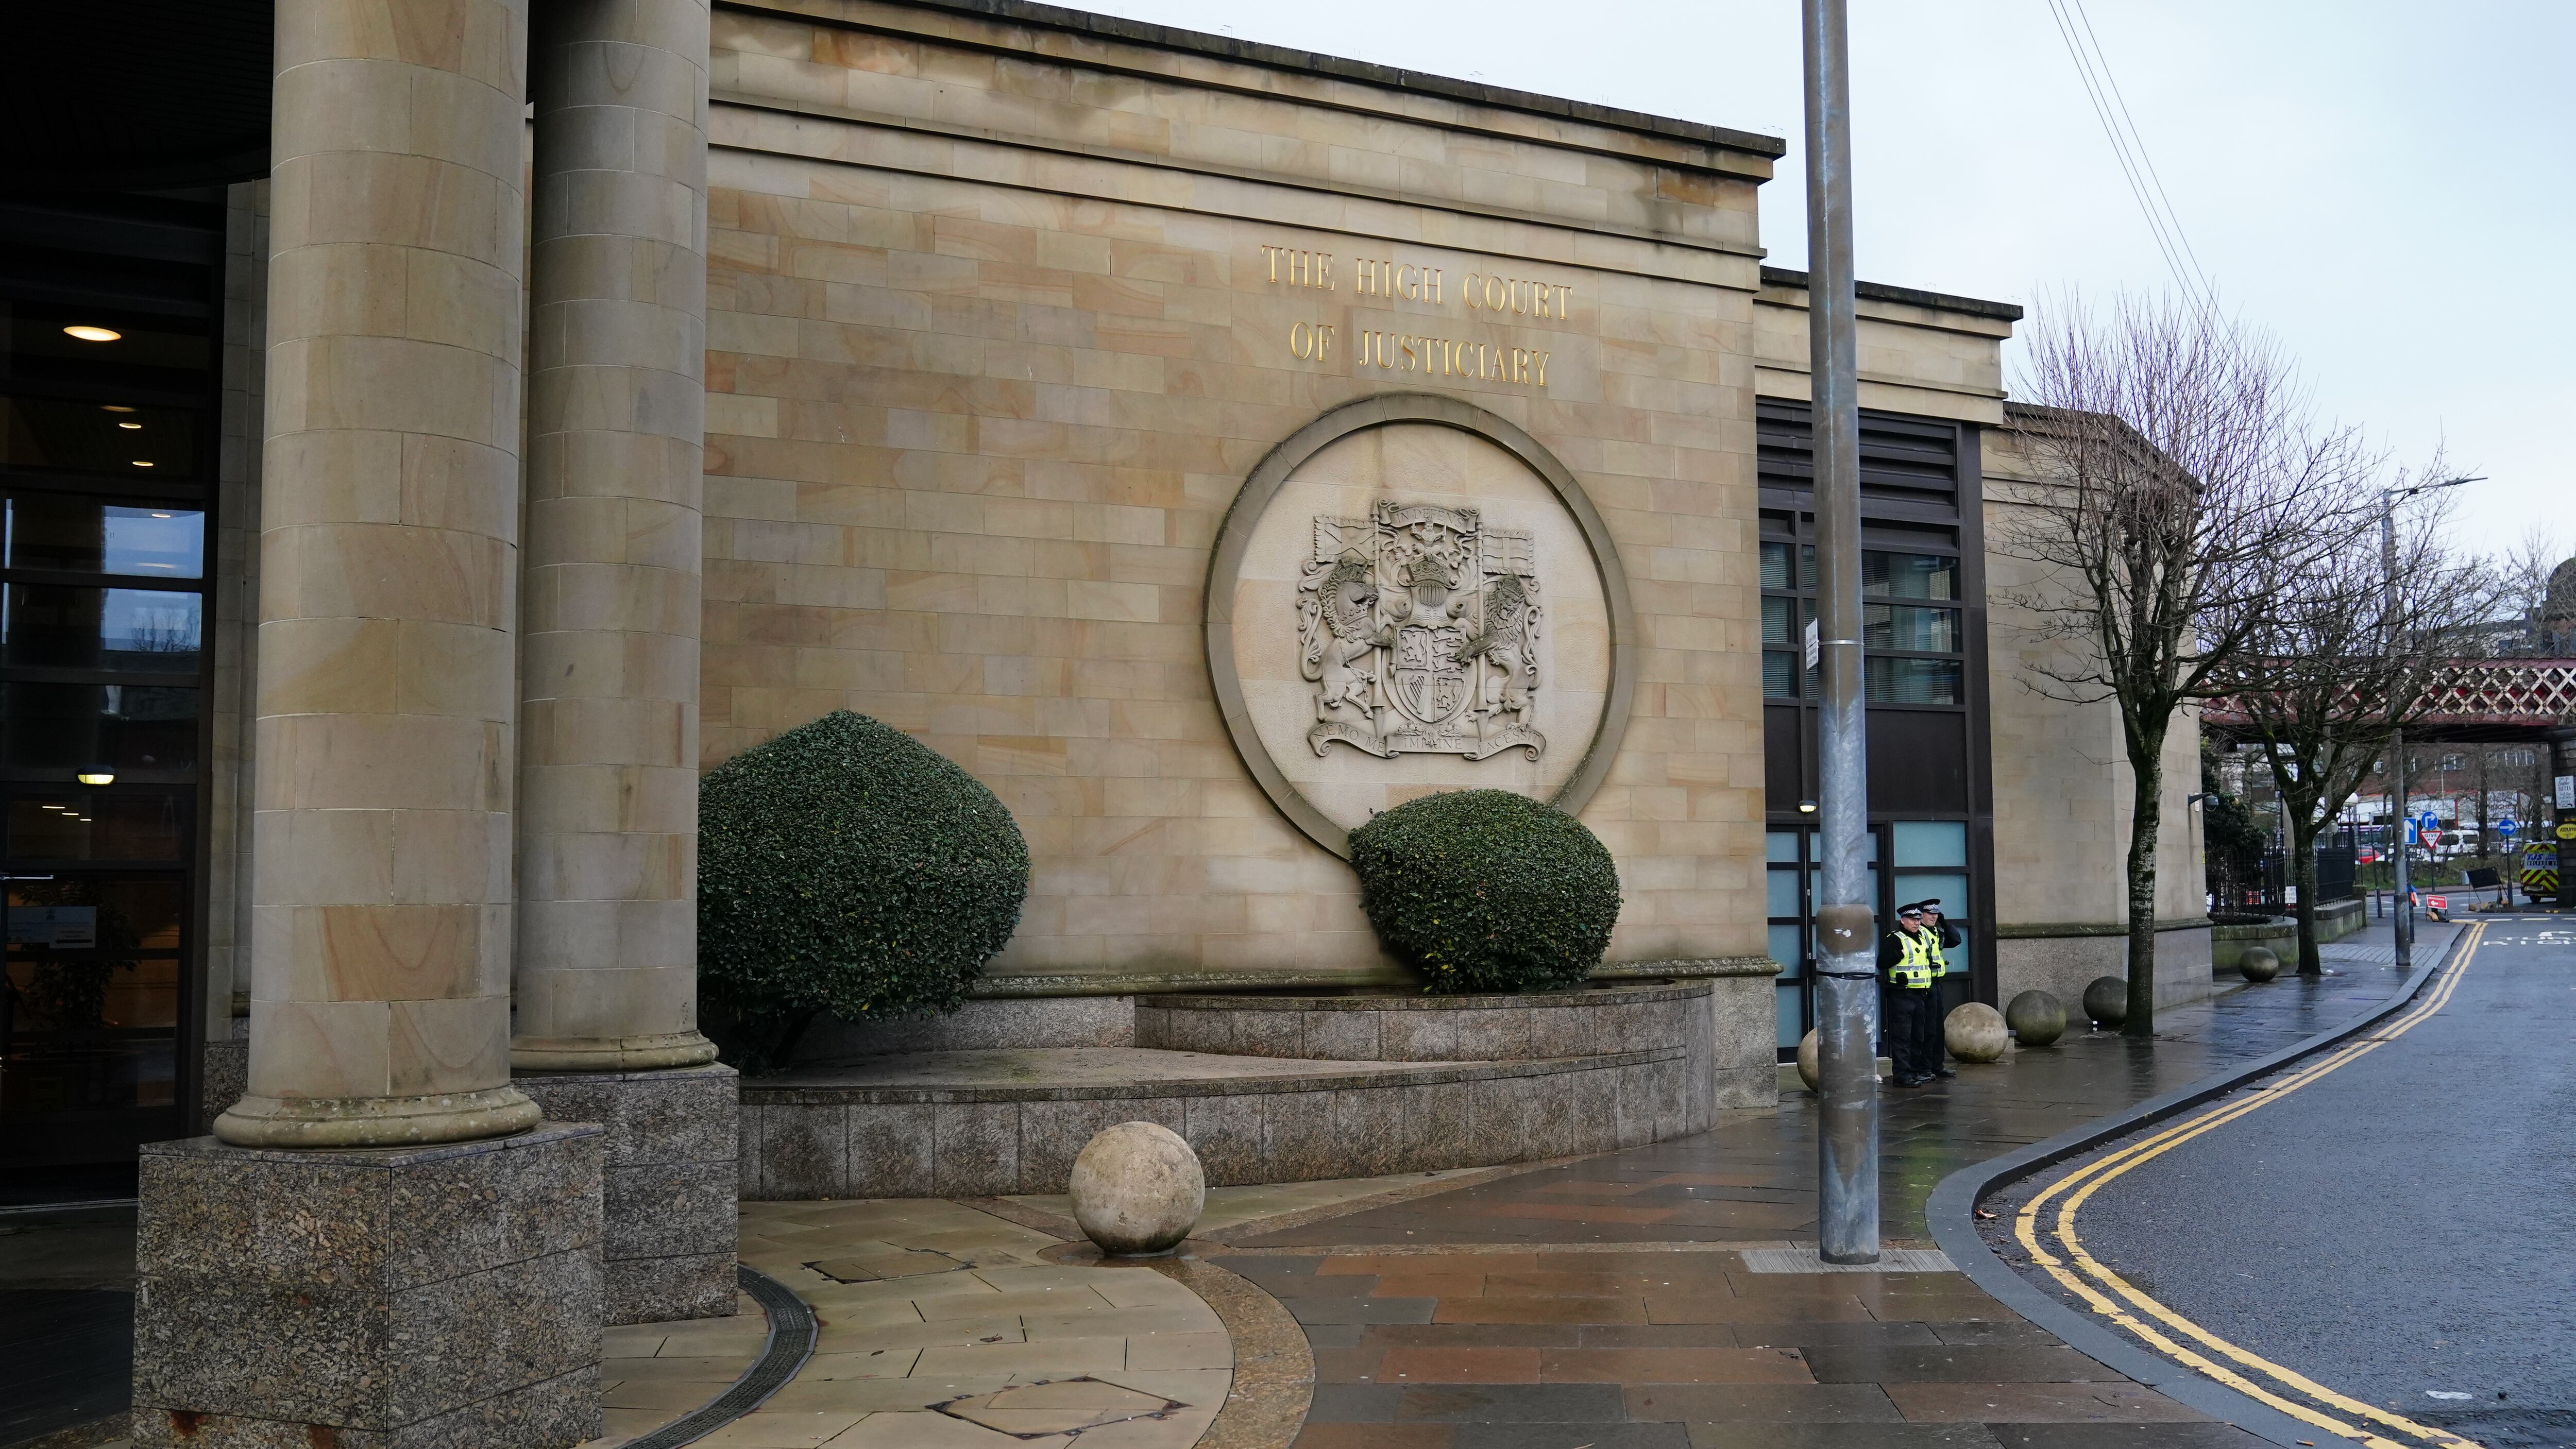 The members of the child abuse gang are set to be sentenced at the High Court in Glasgow